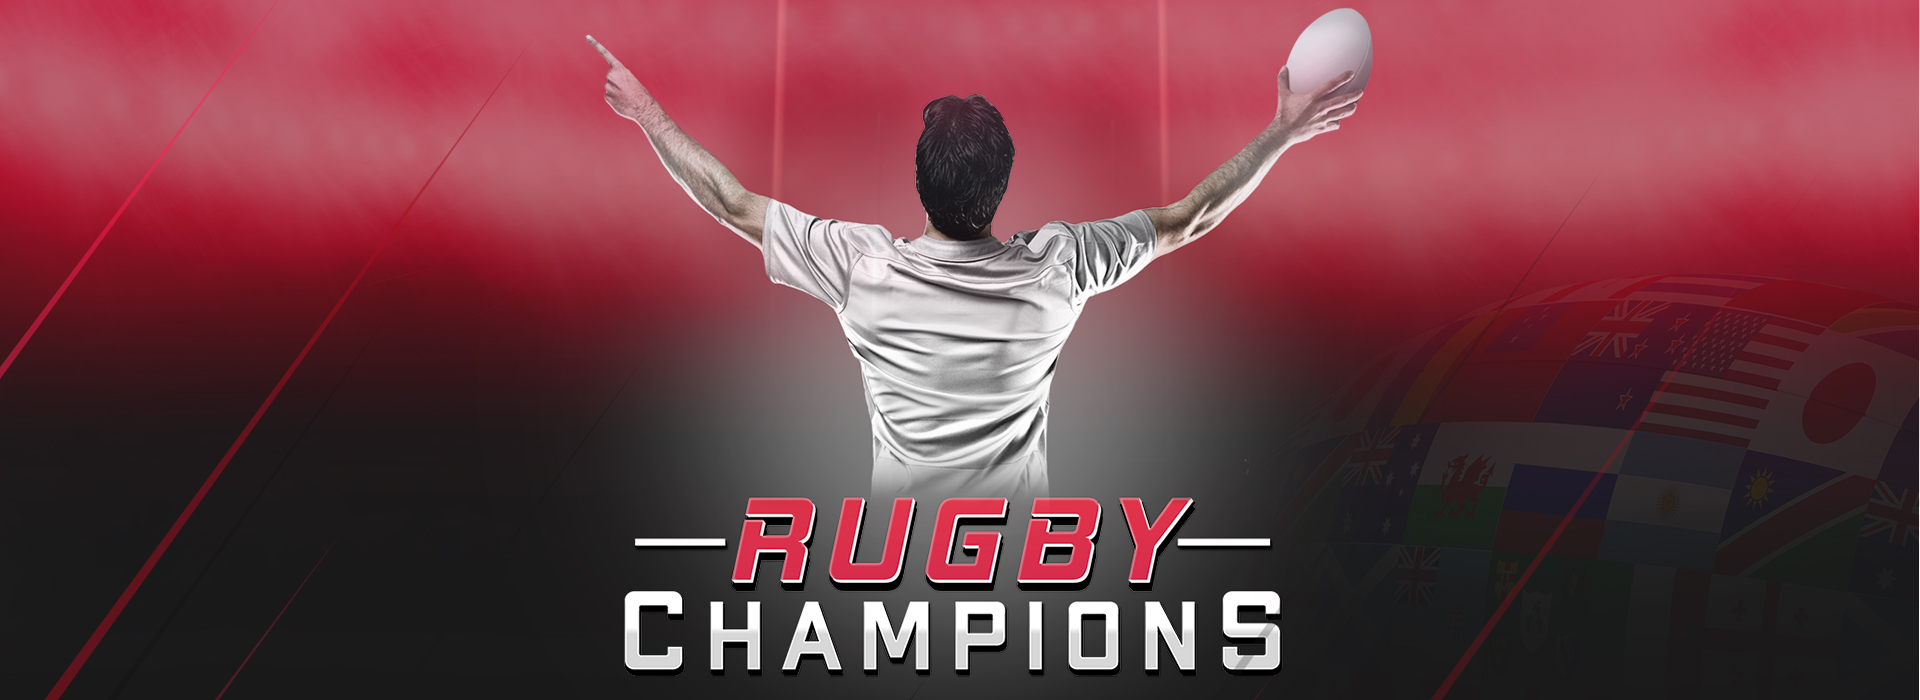 Rugby Champions banner image